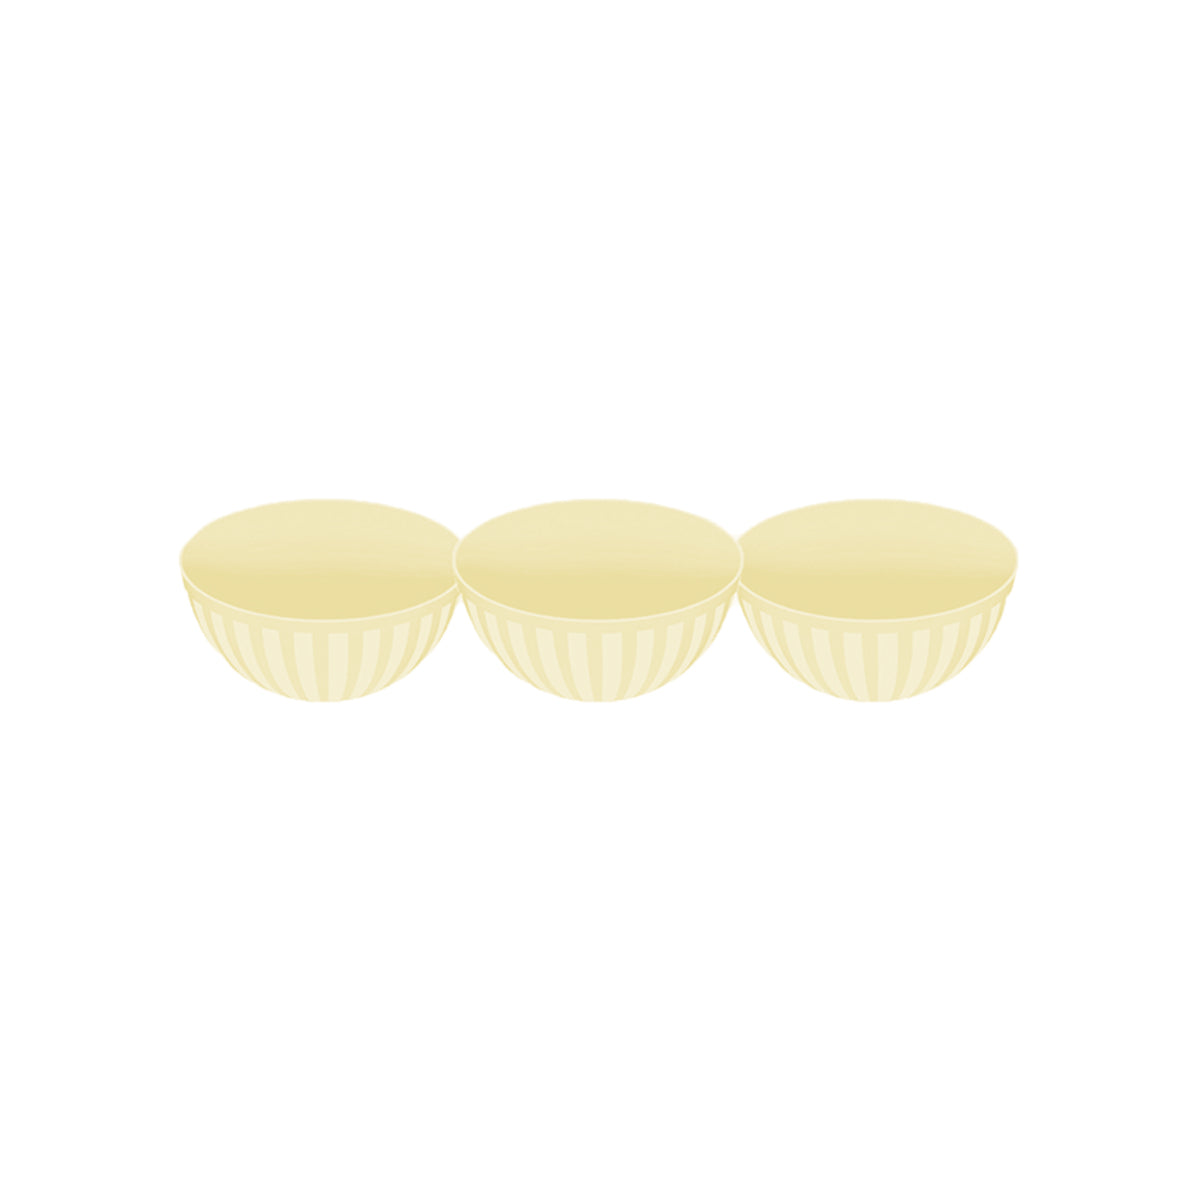 Premio Bowls Large - Pack of 3